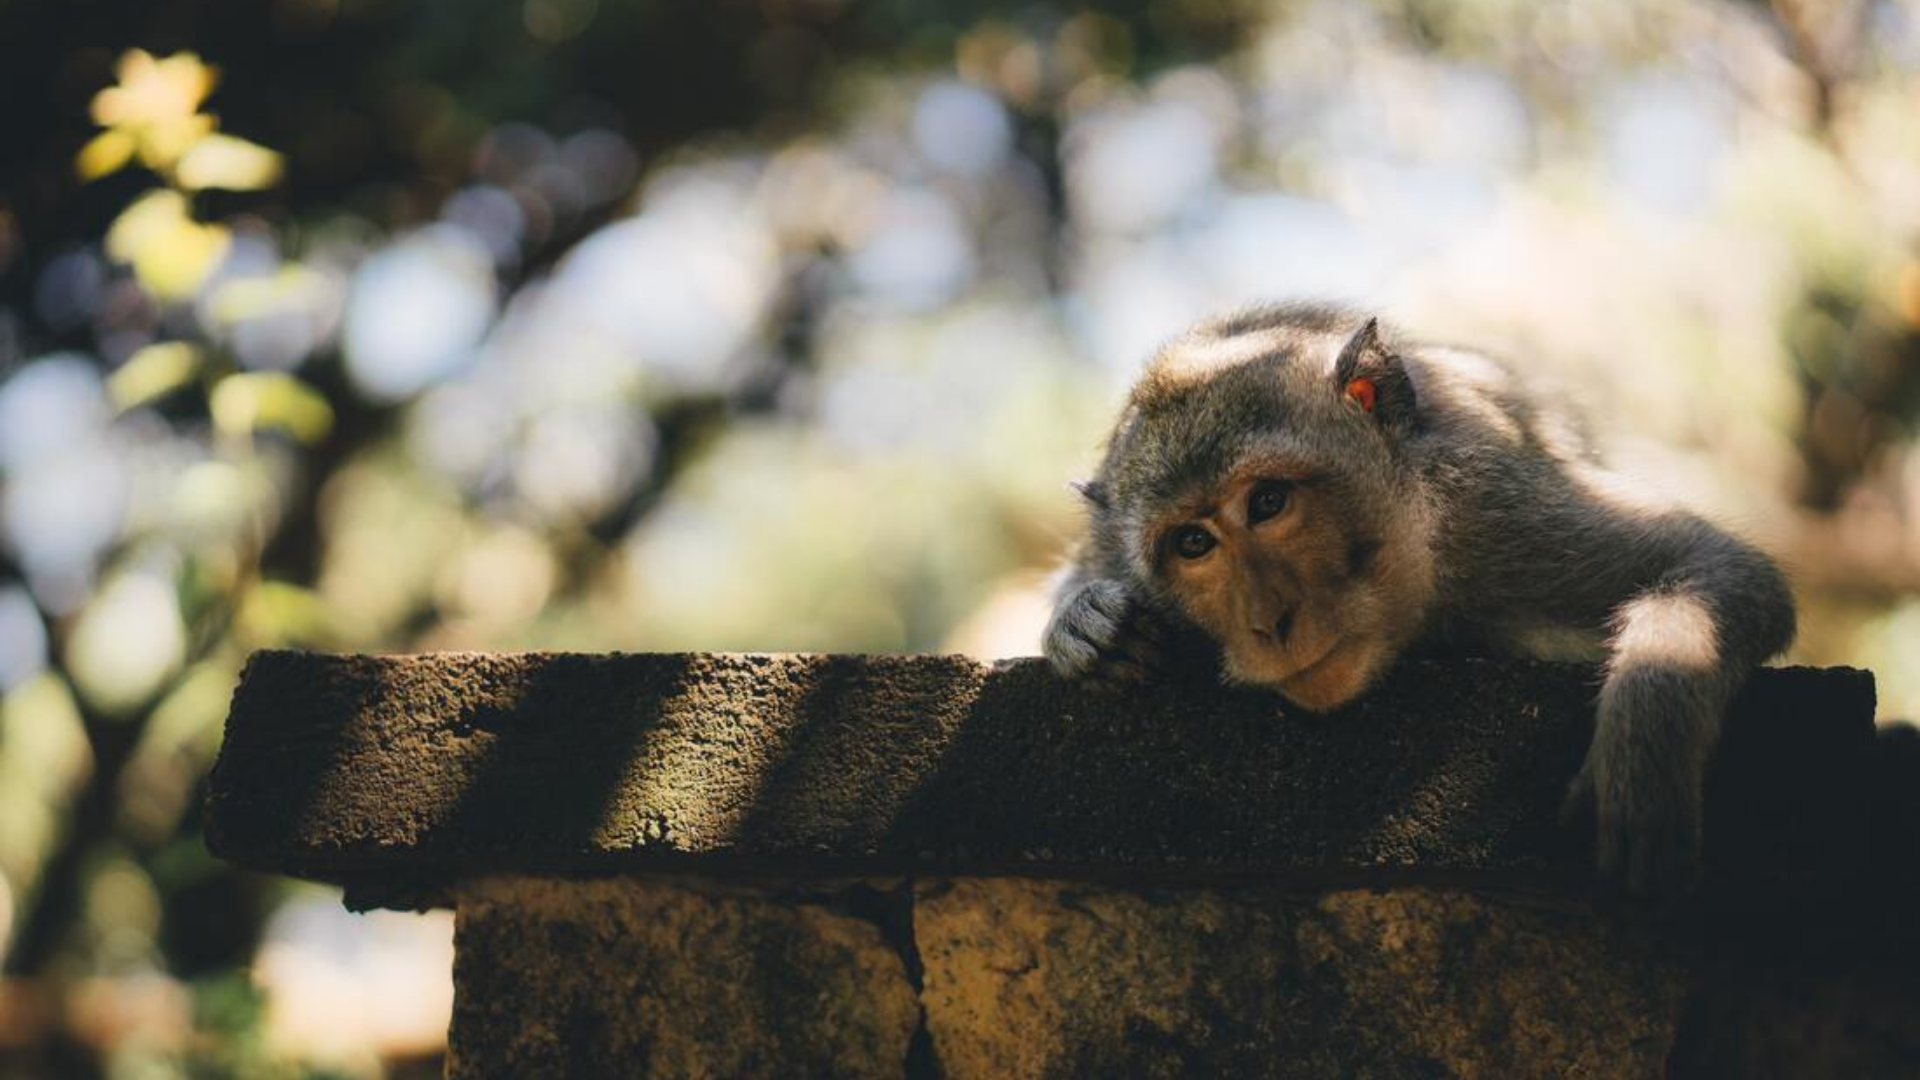 A monkey leans on a stone wall looking bored